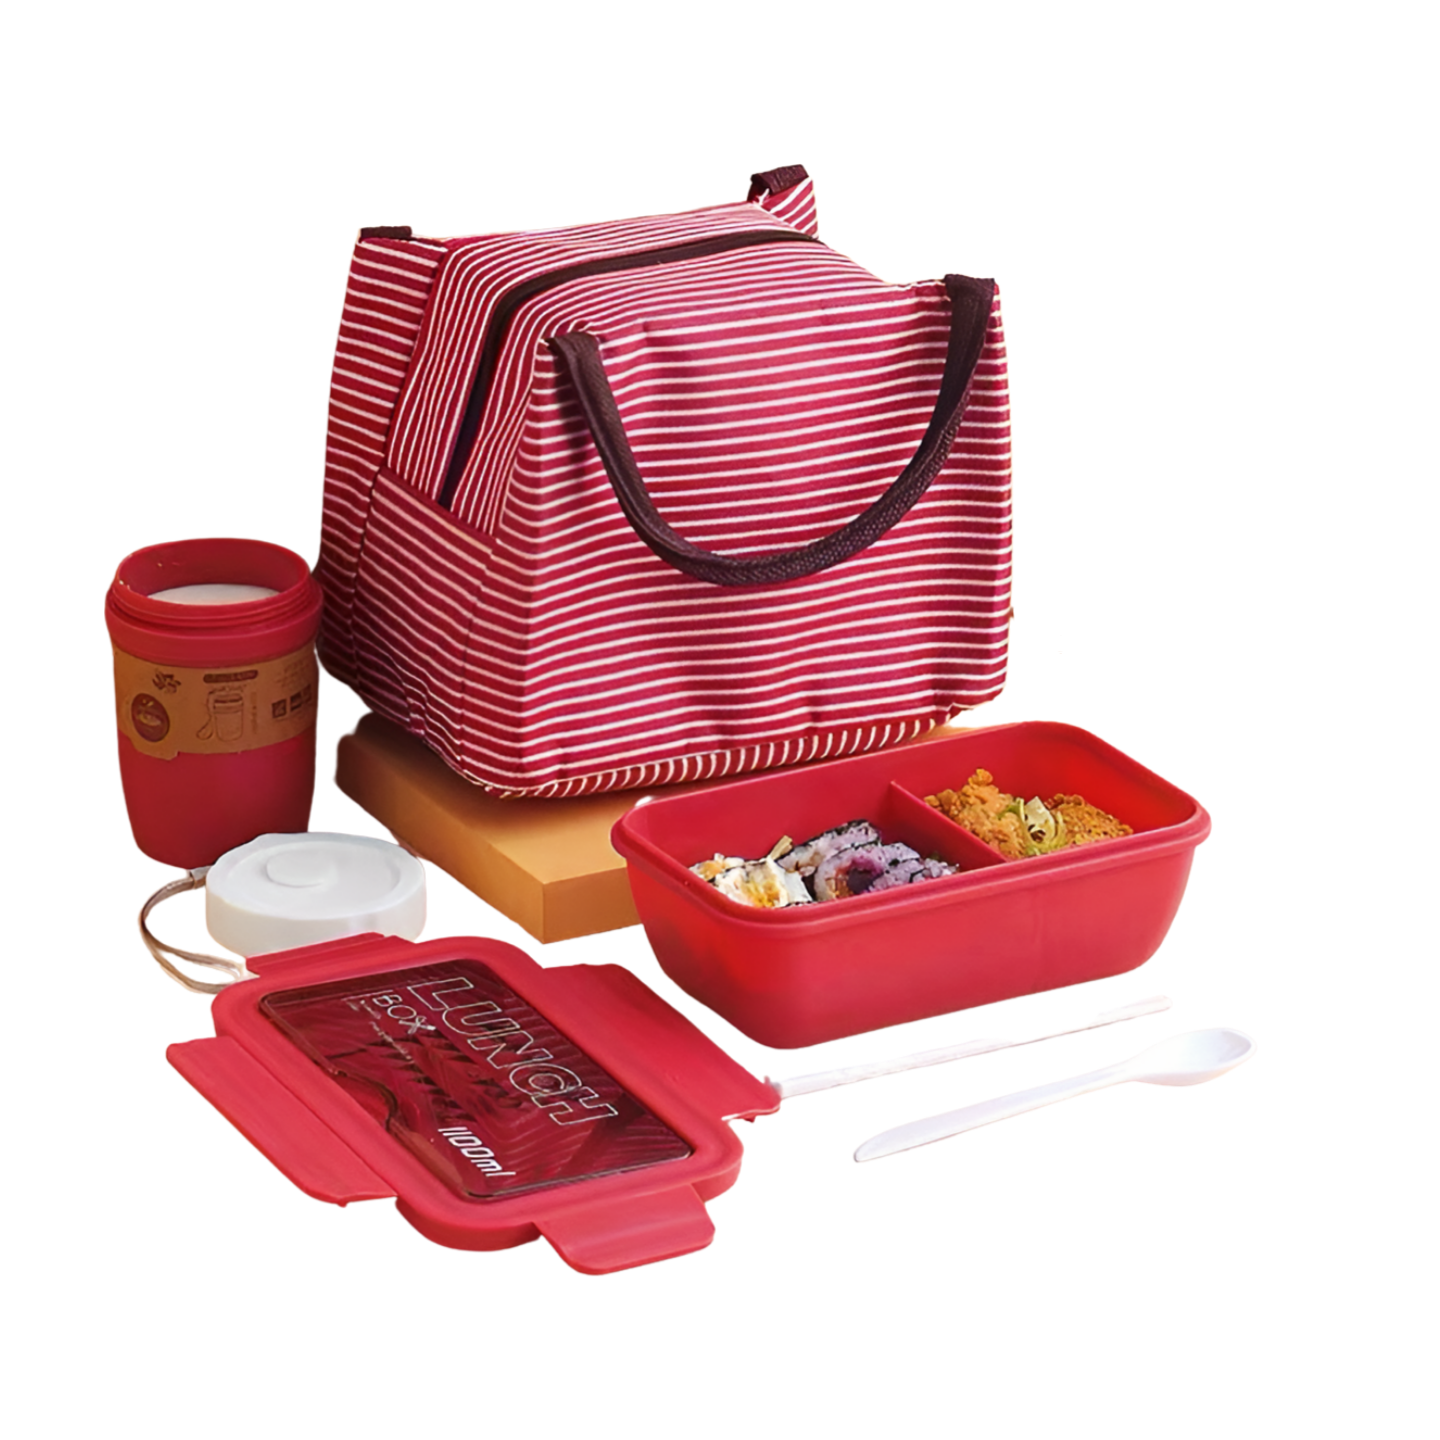 How to Choose a Safe Lunch Box Container